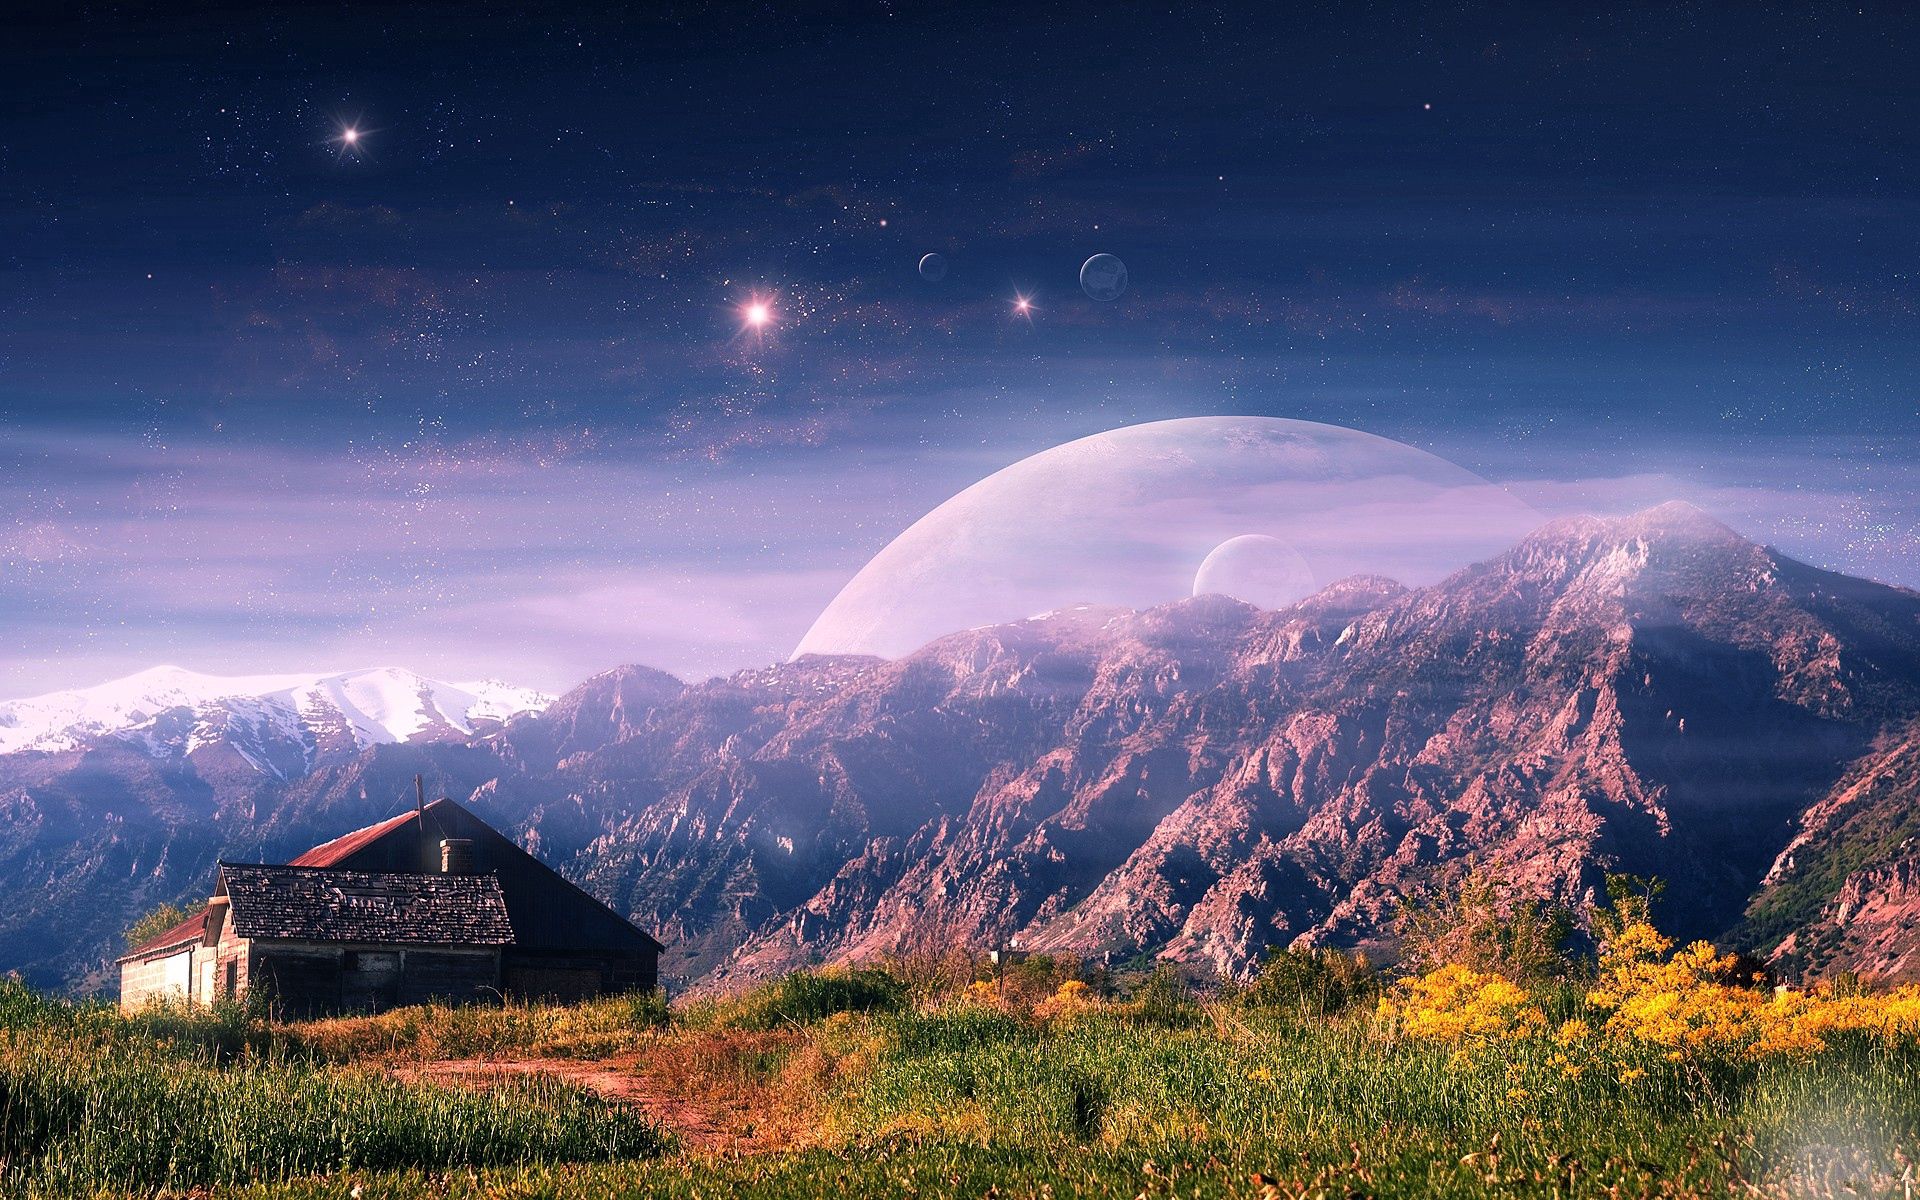 mountains, lodge, small house, planets, nature